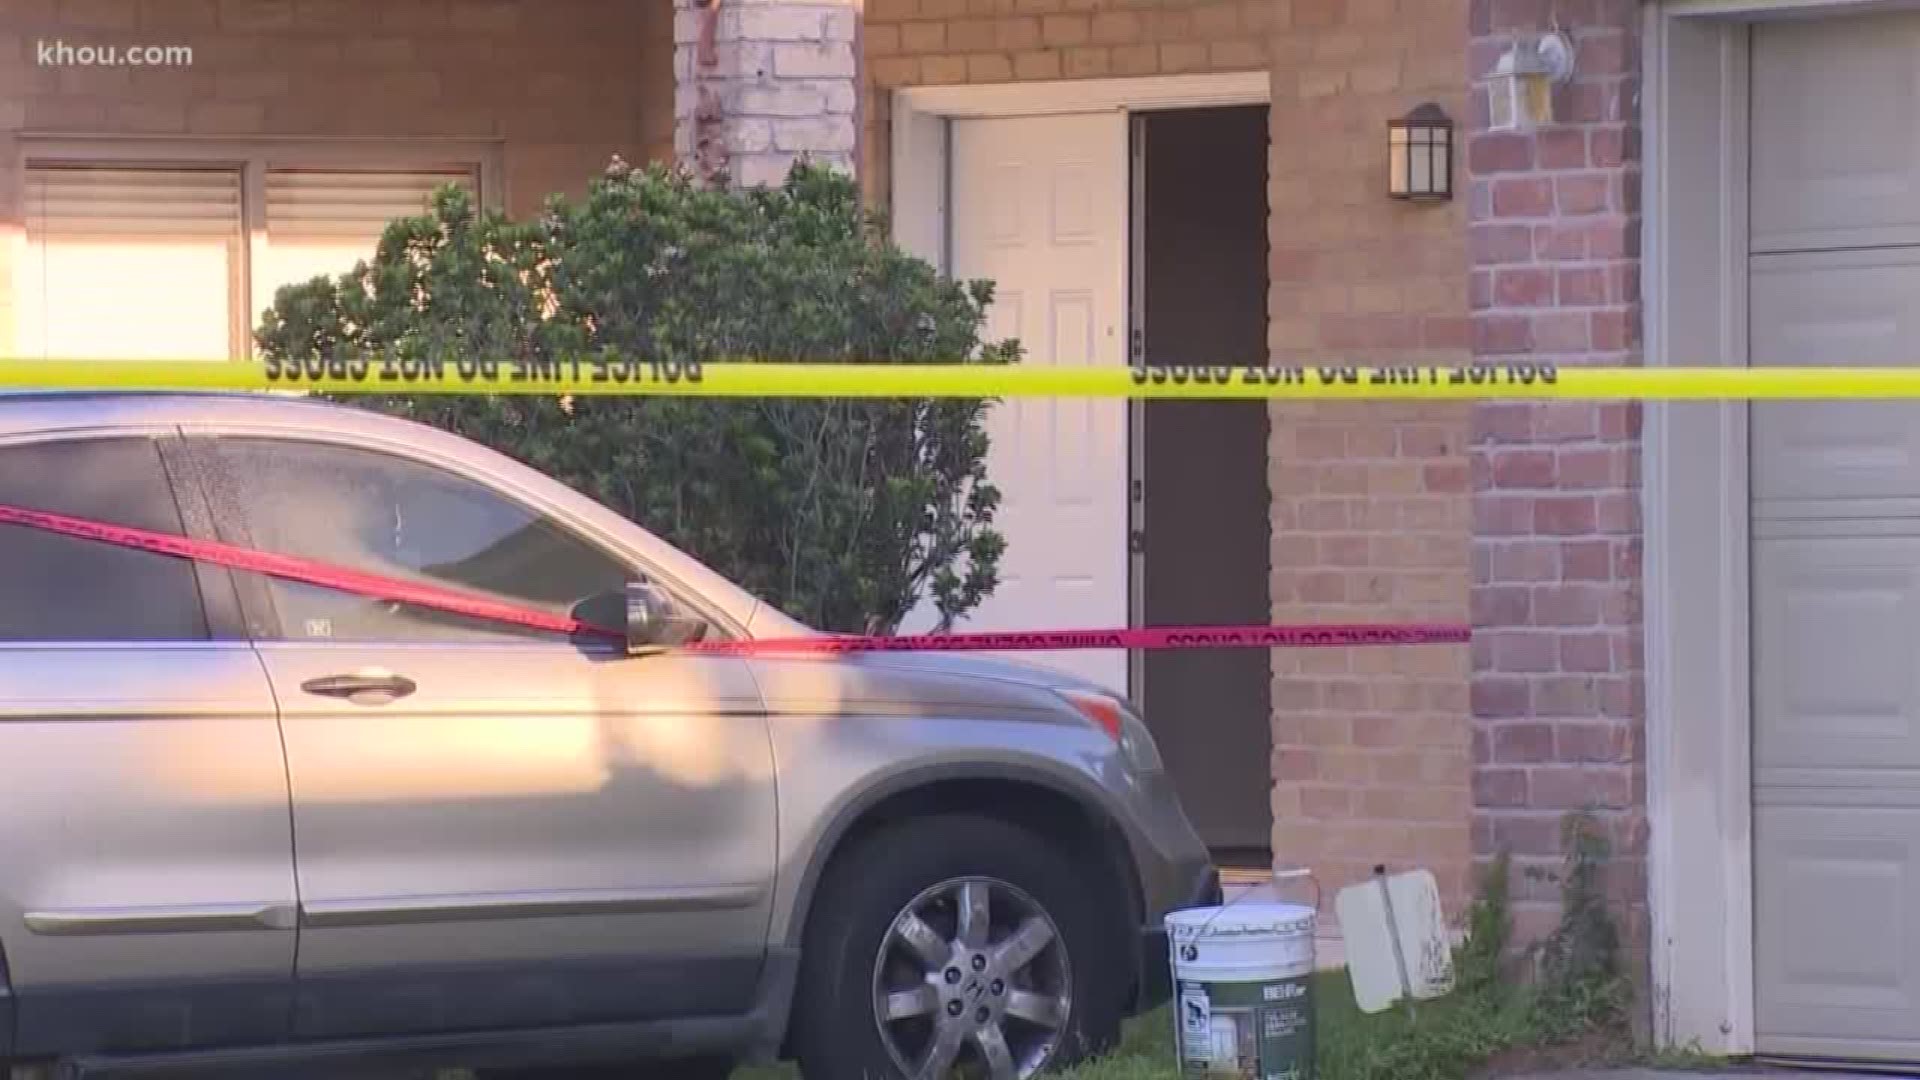 A young man fatally shot a home invasion suspect in the head late Tuesday, according to police in southwest Houston.